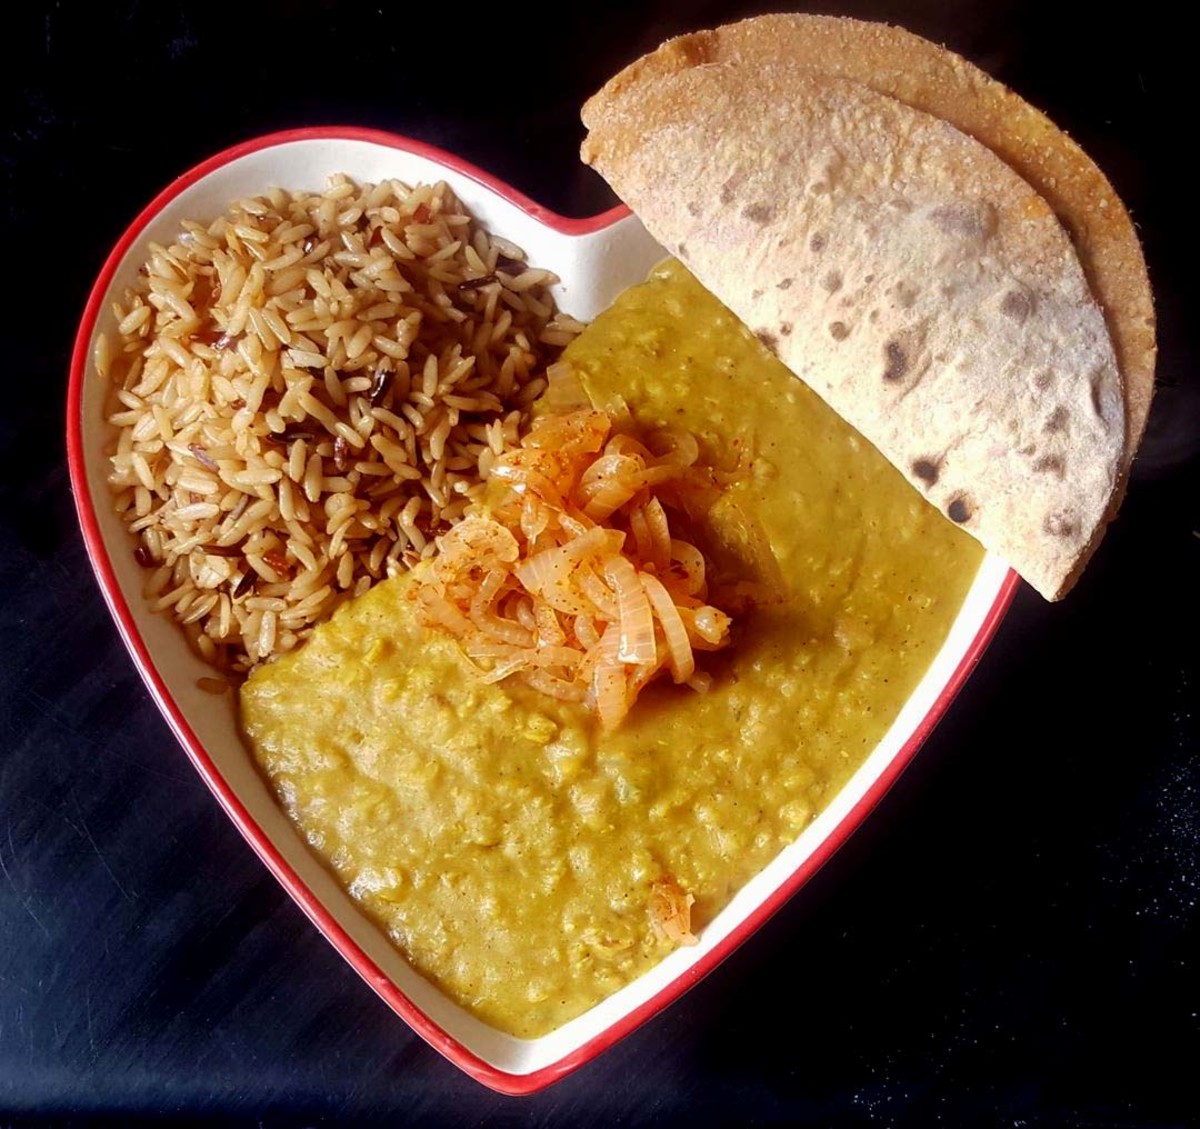 My evening meal might be lentil curry with brown rice, onion sambal and sweet potato roti